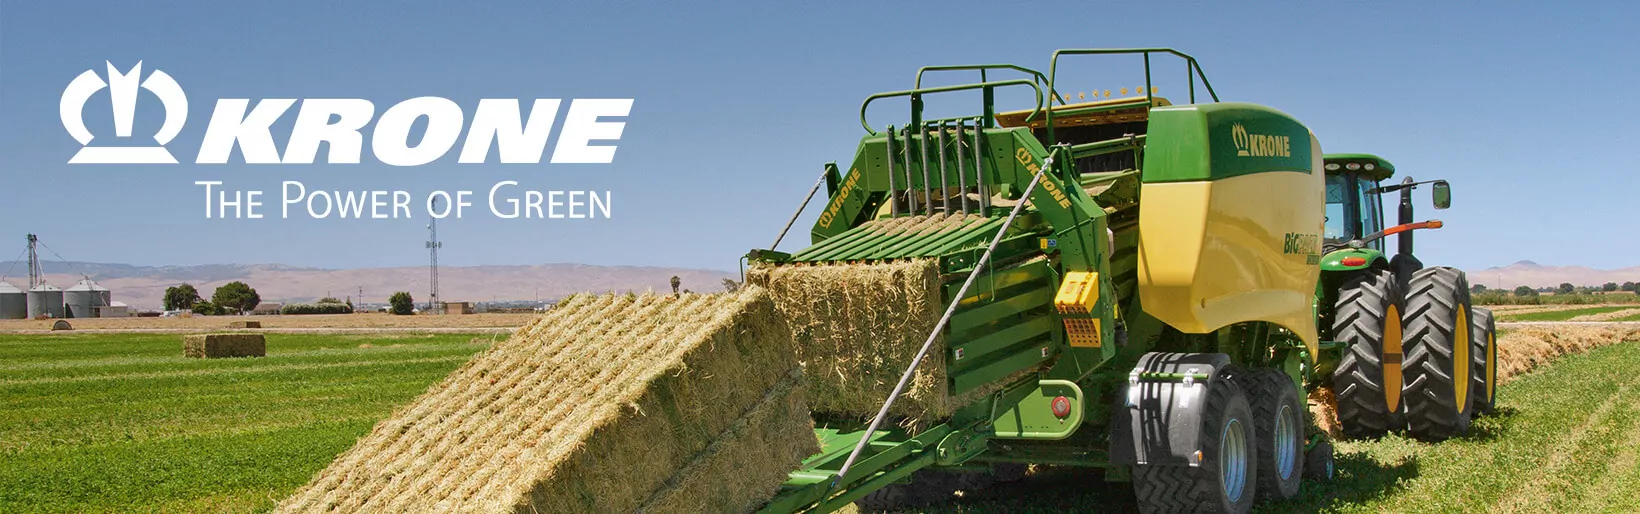 mykrone.green – The new customer information center for Krone agricultural machinery